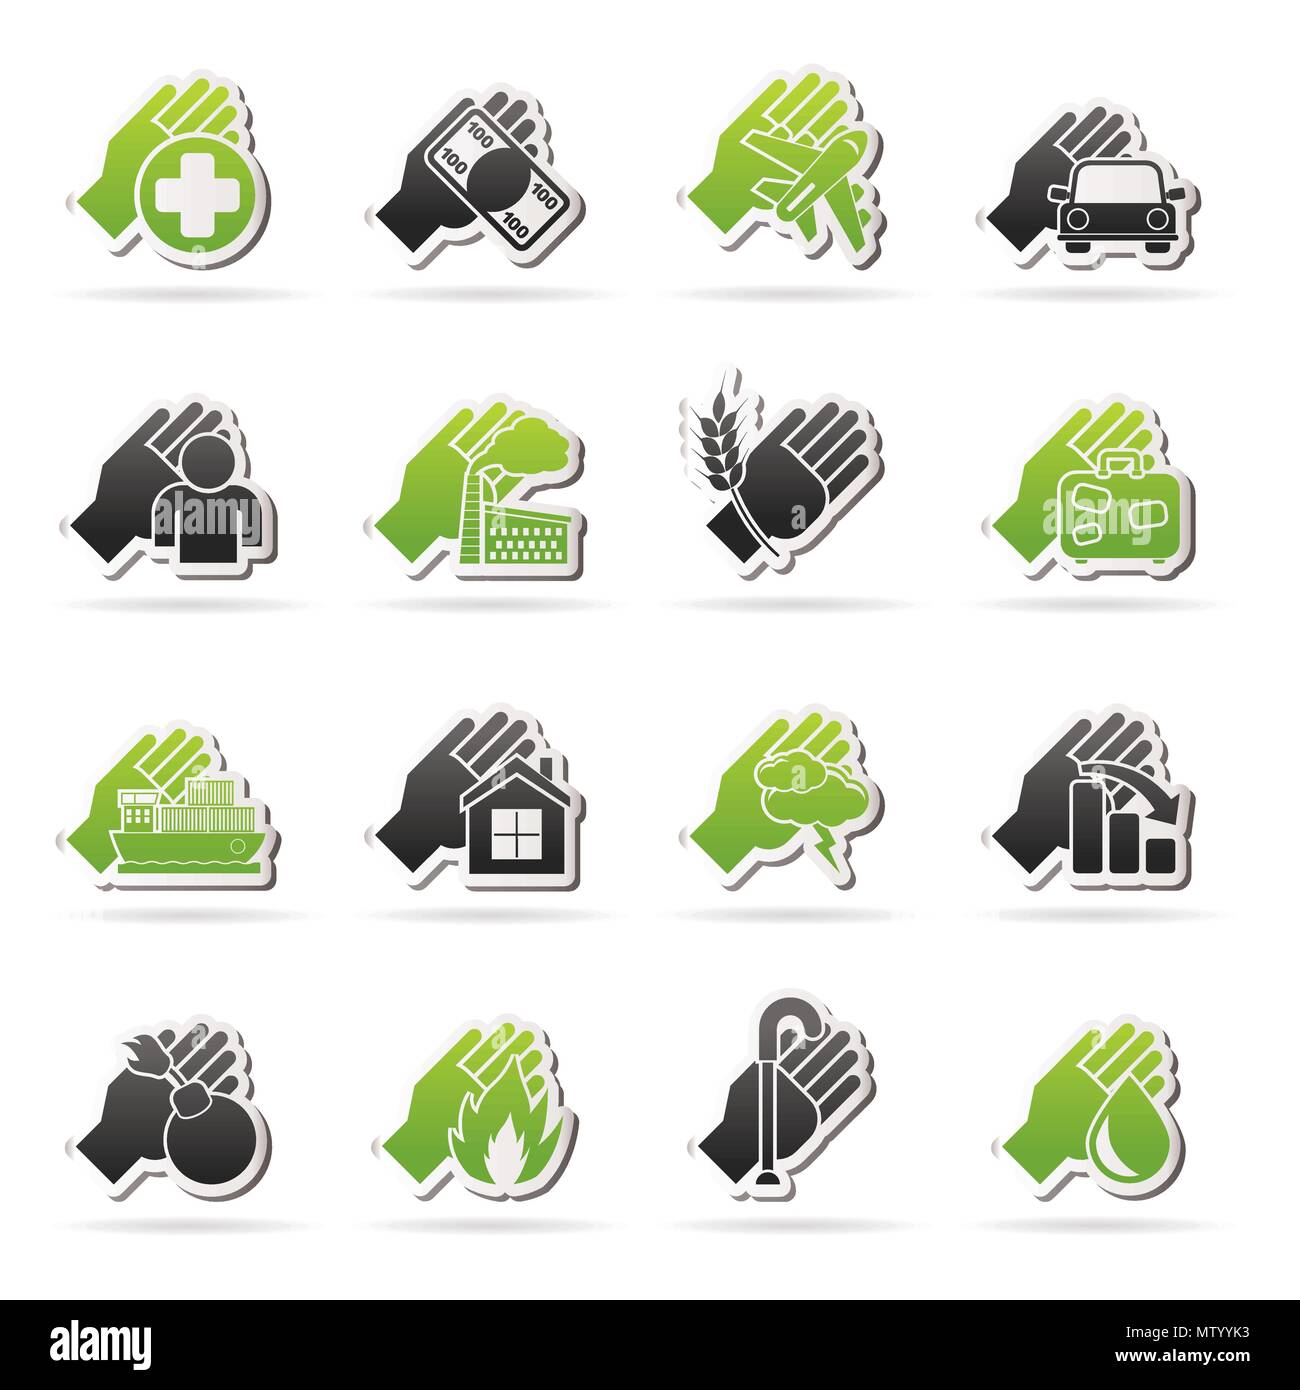 Insurance and risk icons - vector icon set Stock Vector